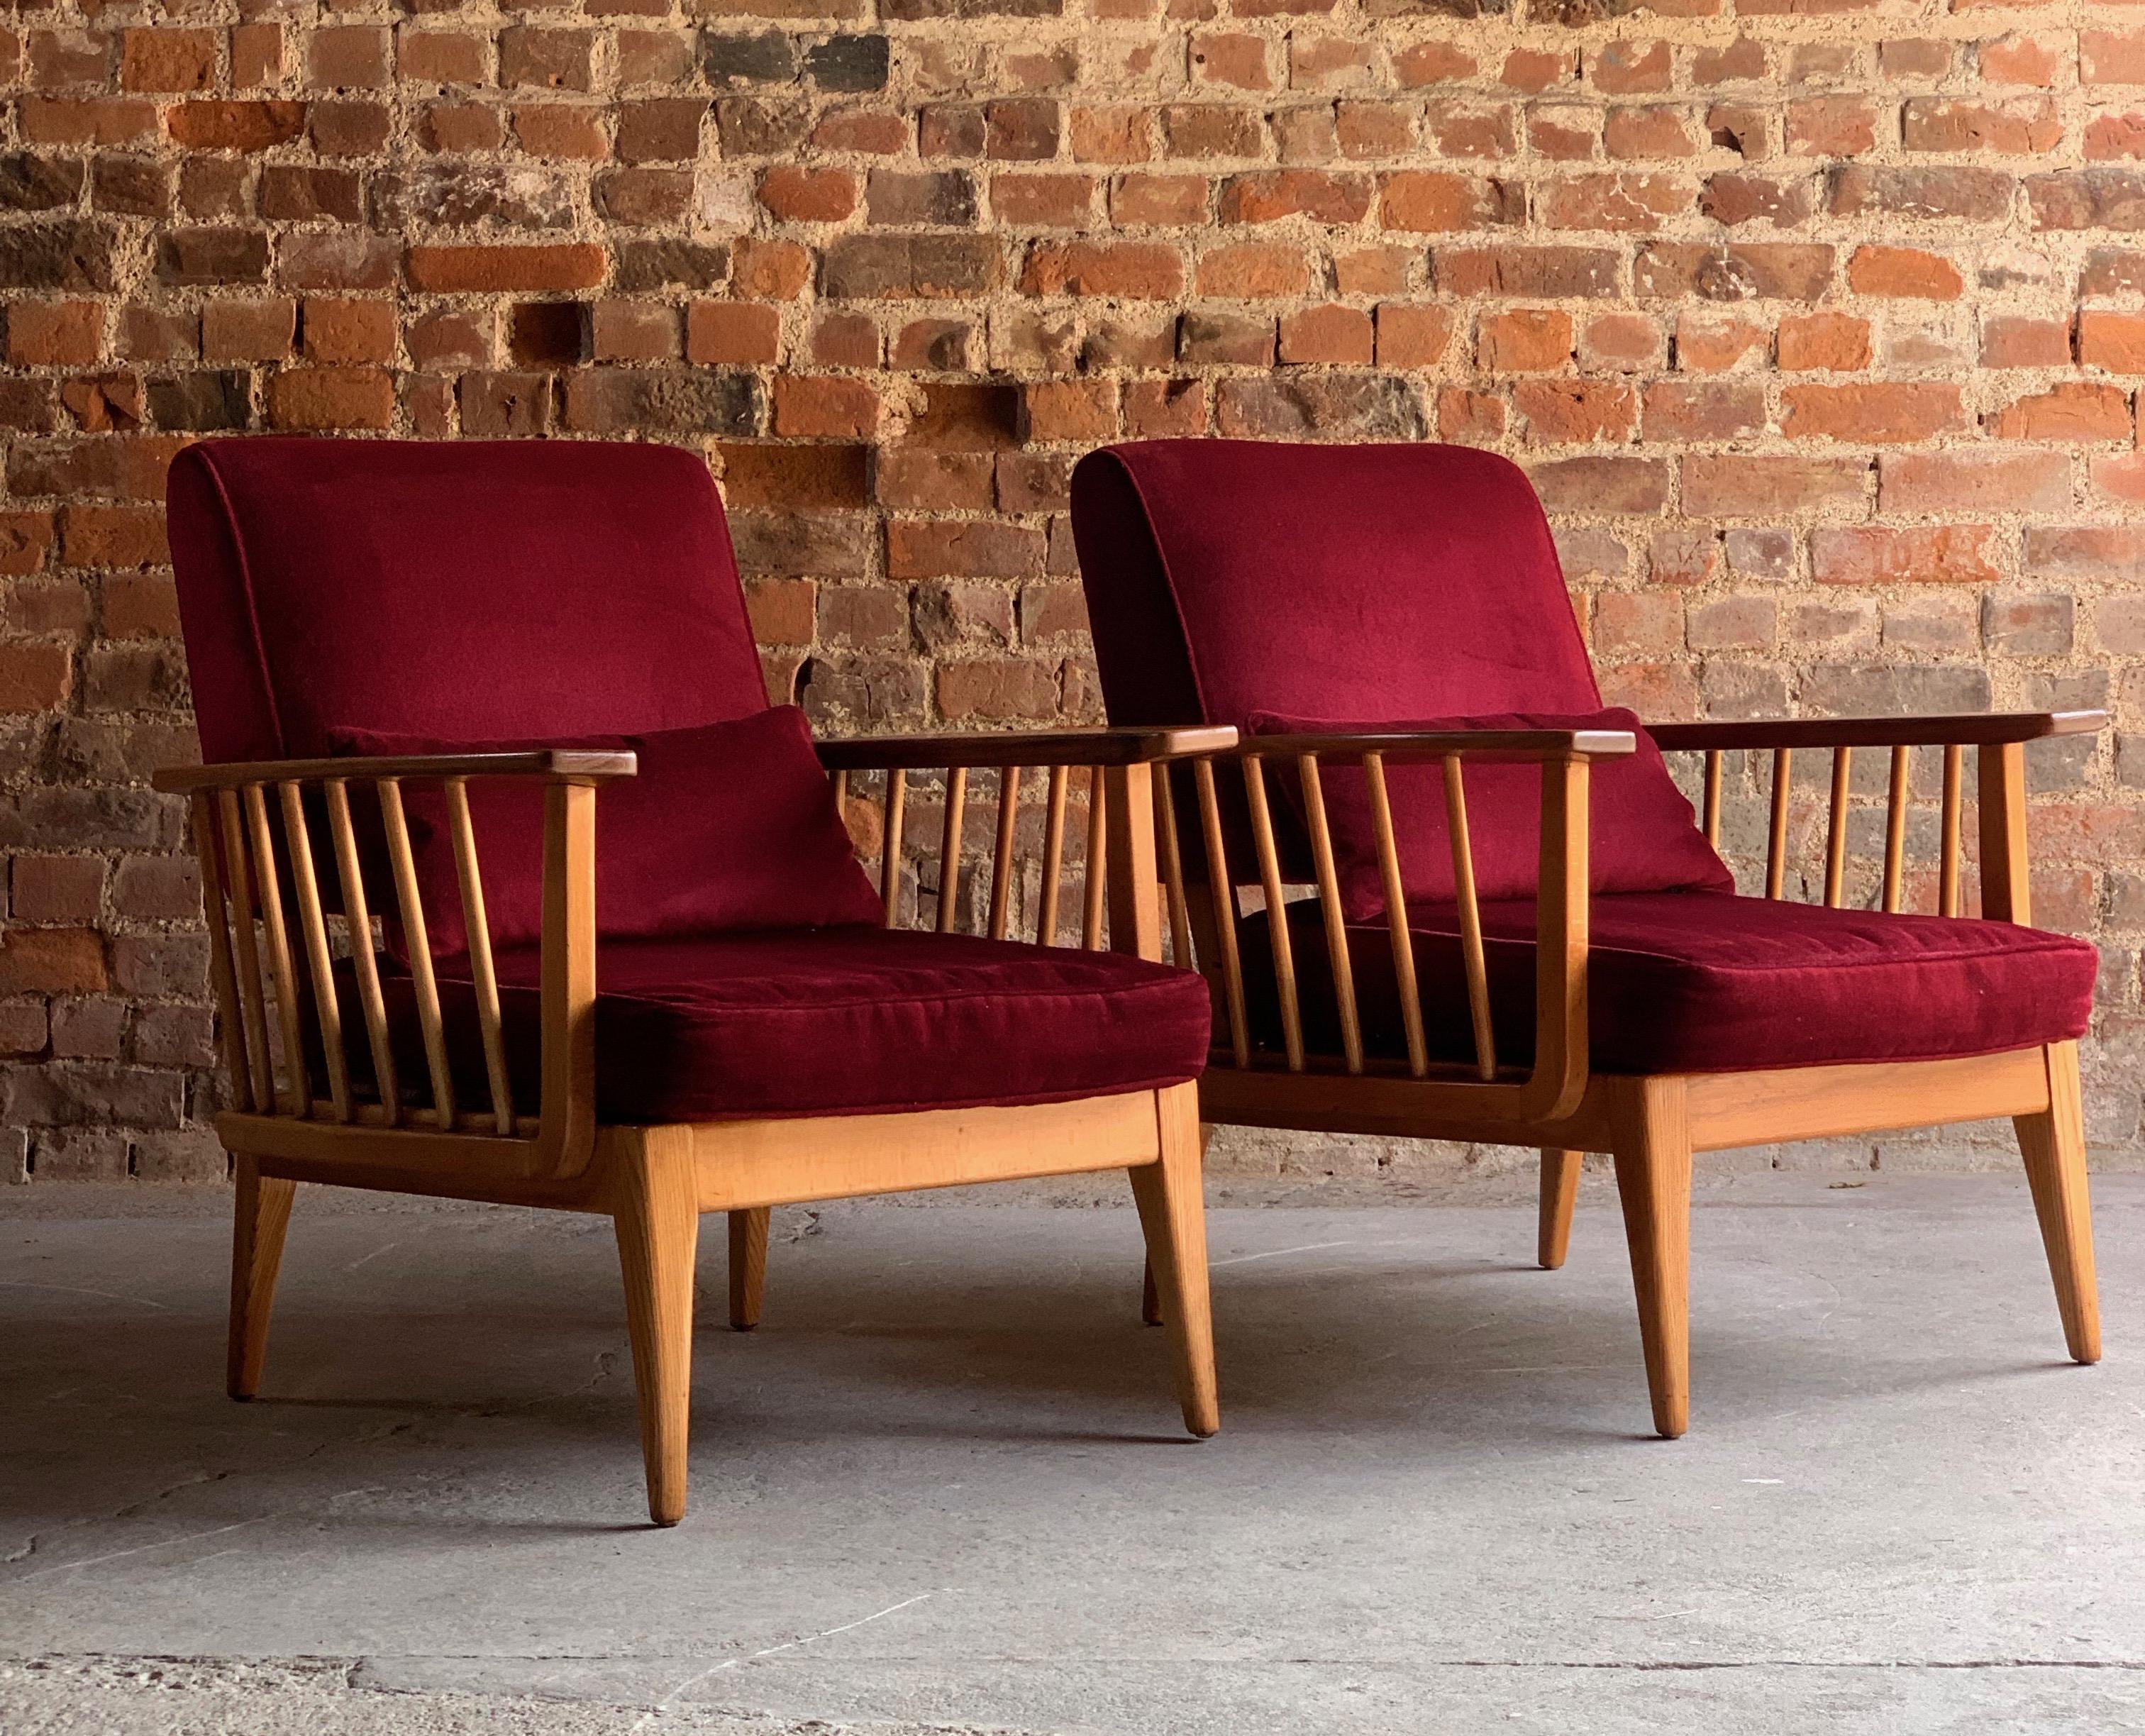 Mid-Century Modern elm sofa & two armchair suite three-piece, circa 1960s

Magnificent midcentury Blonde Elm three-piece Lounge Suite circa 1960, comprising of three-seat sofa and two matching armchairs dressed in cranberry red velvet upholstery